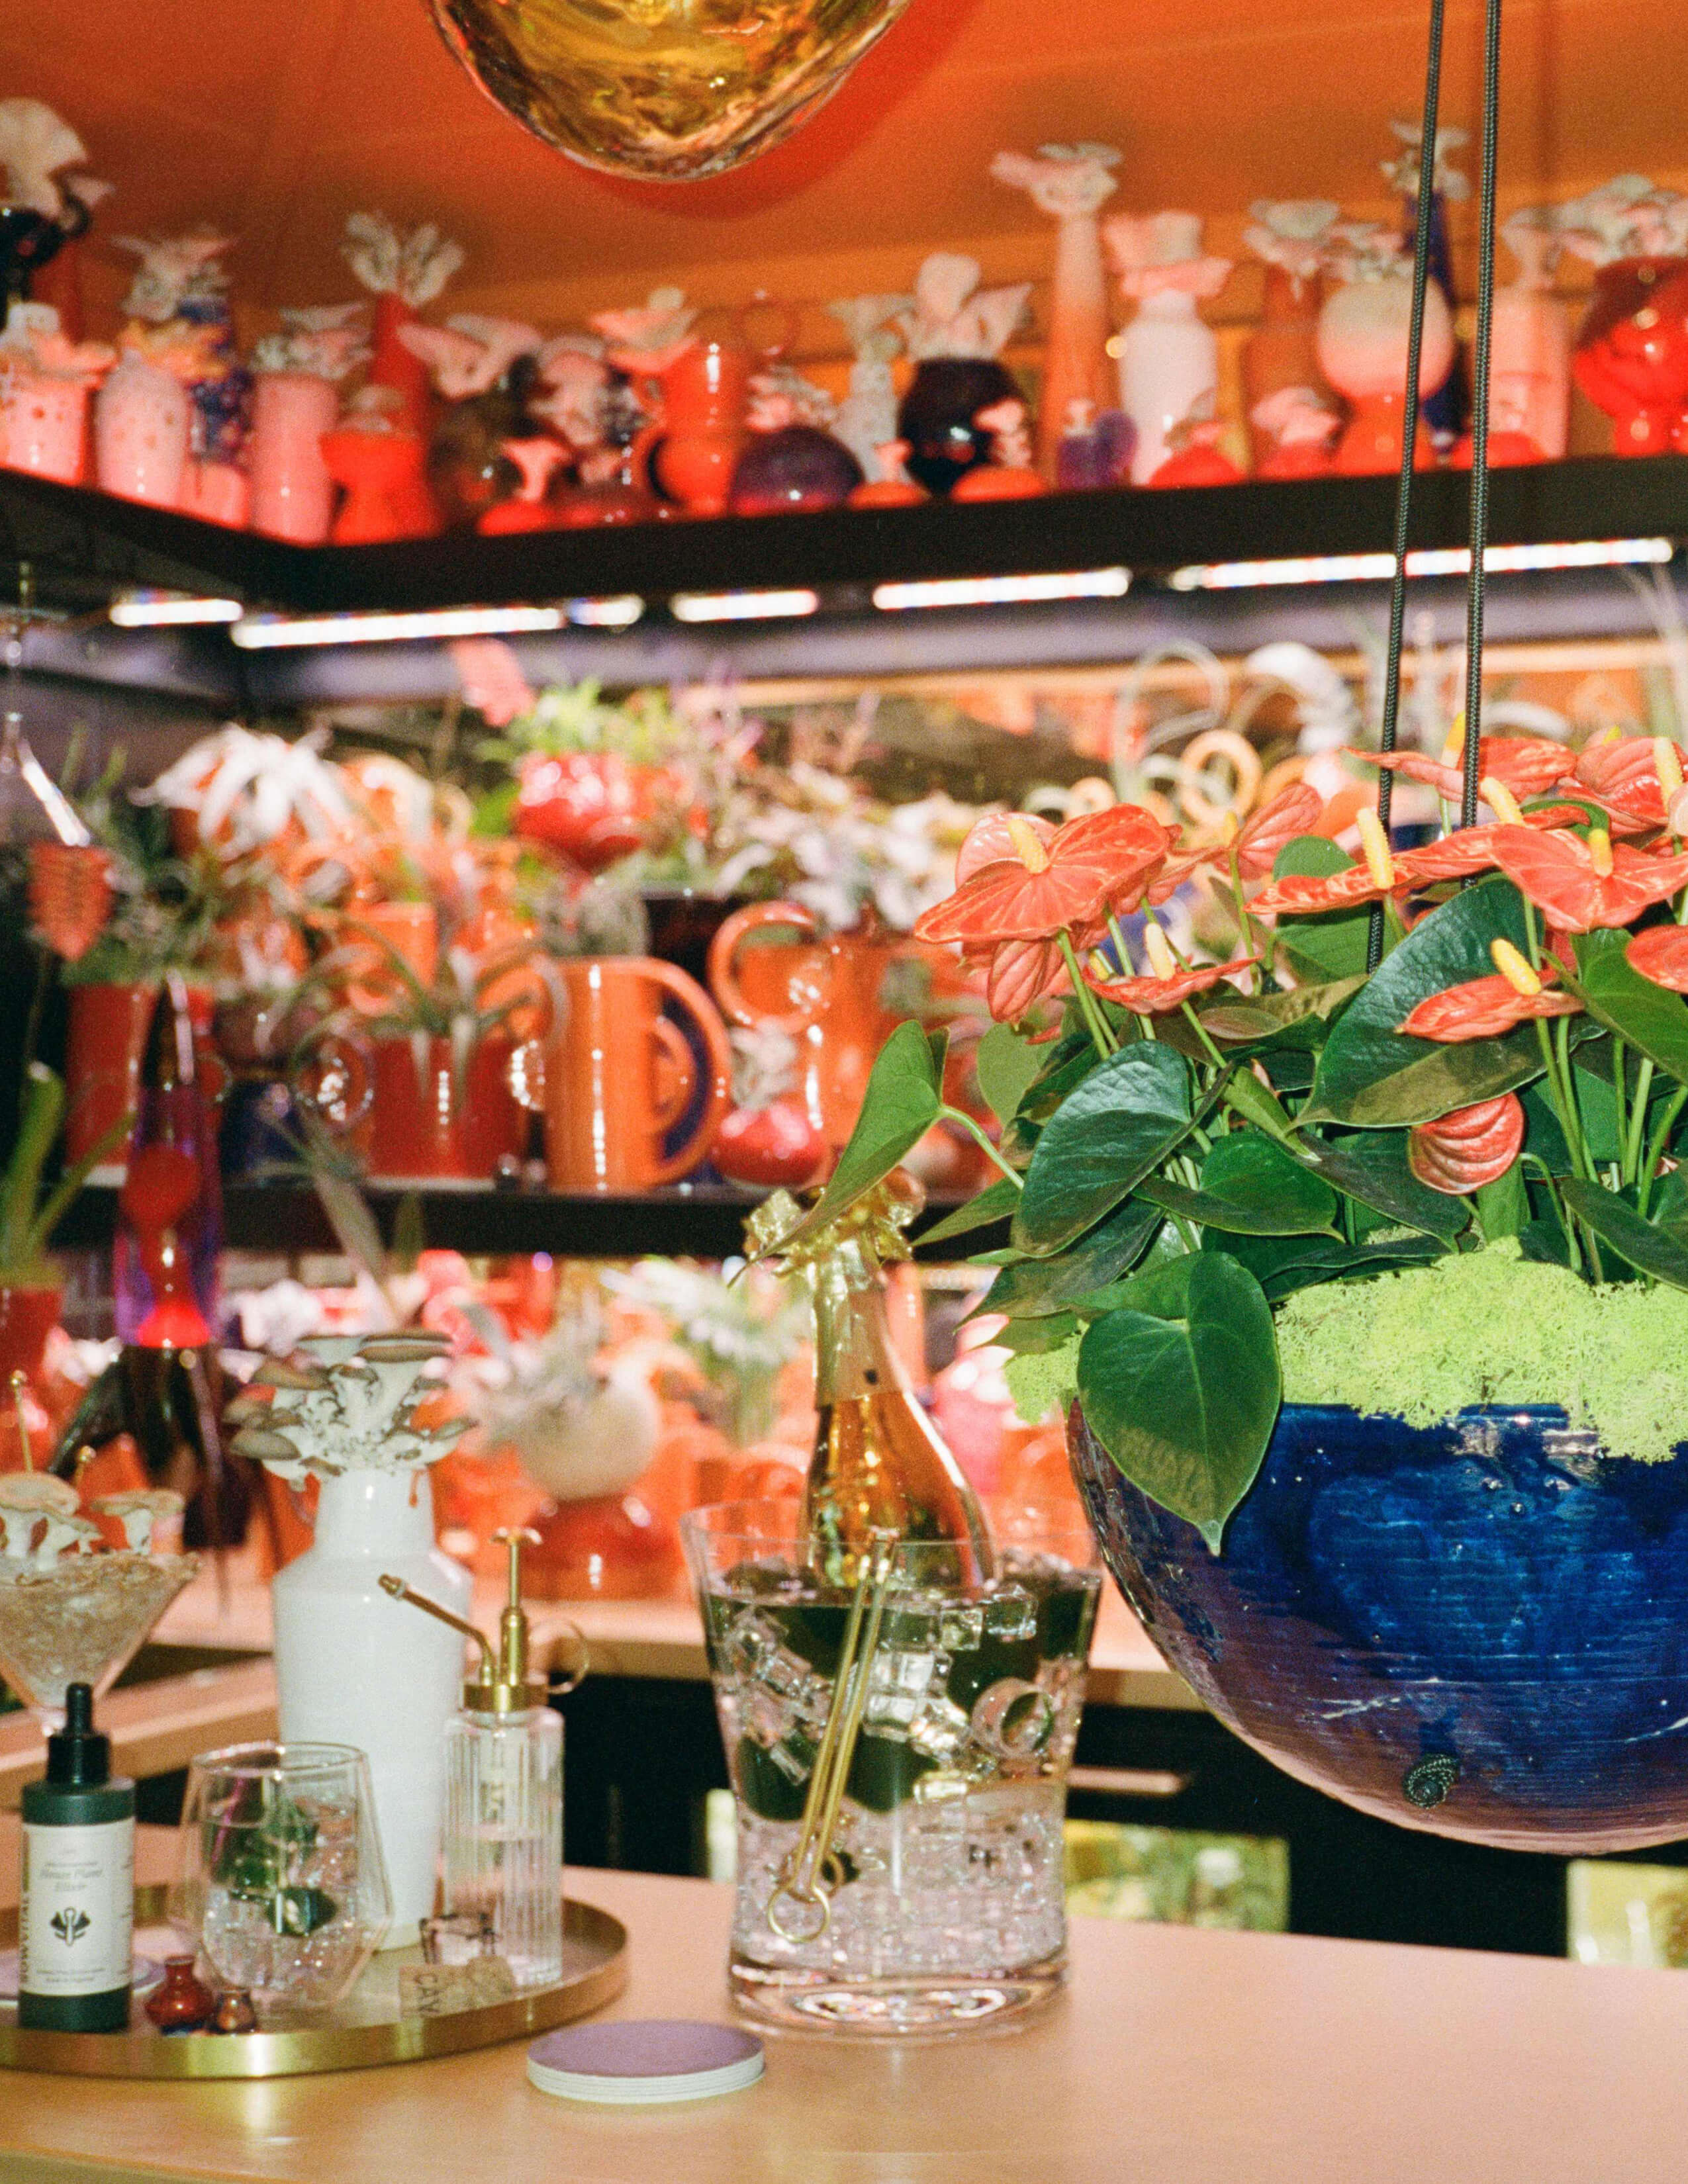 A collection of different kinds of plants in different vases filled up the whole shelf. A bottle of Sowvital house plant product on a golden tray next to various kinds of glassware on the table and there was a bottle of champagne in a glass bucket.